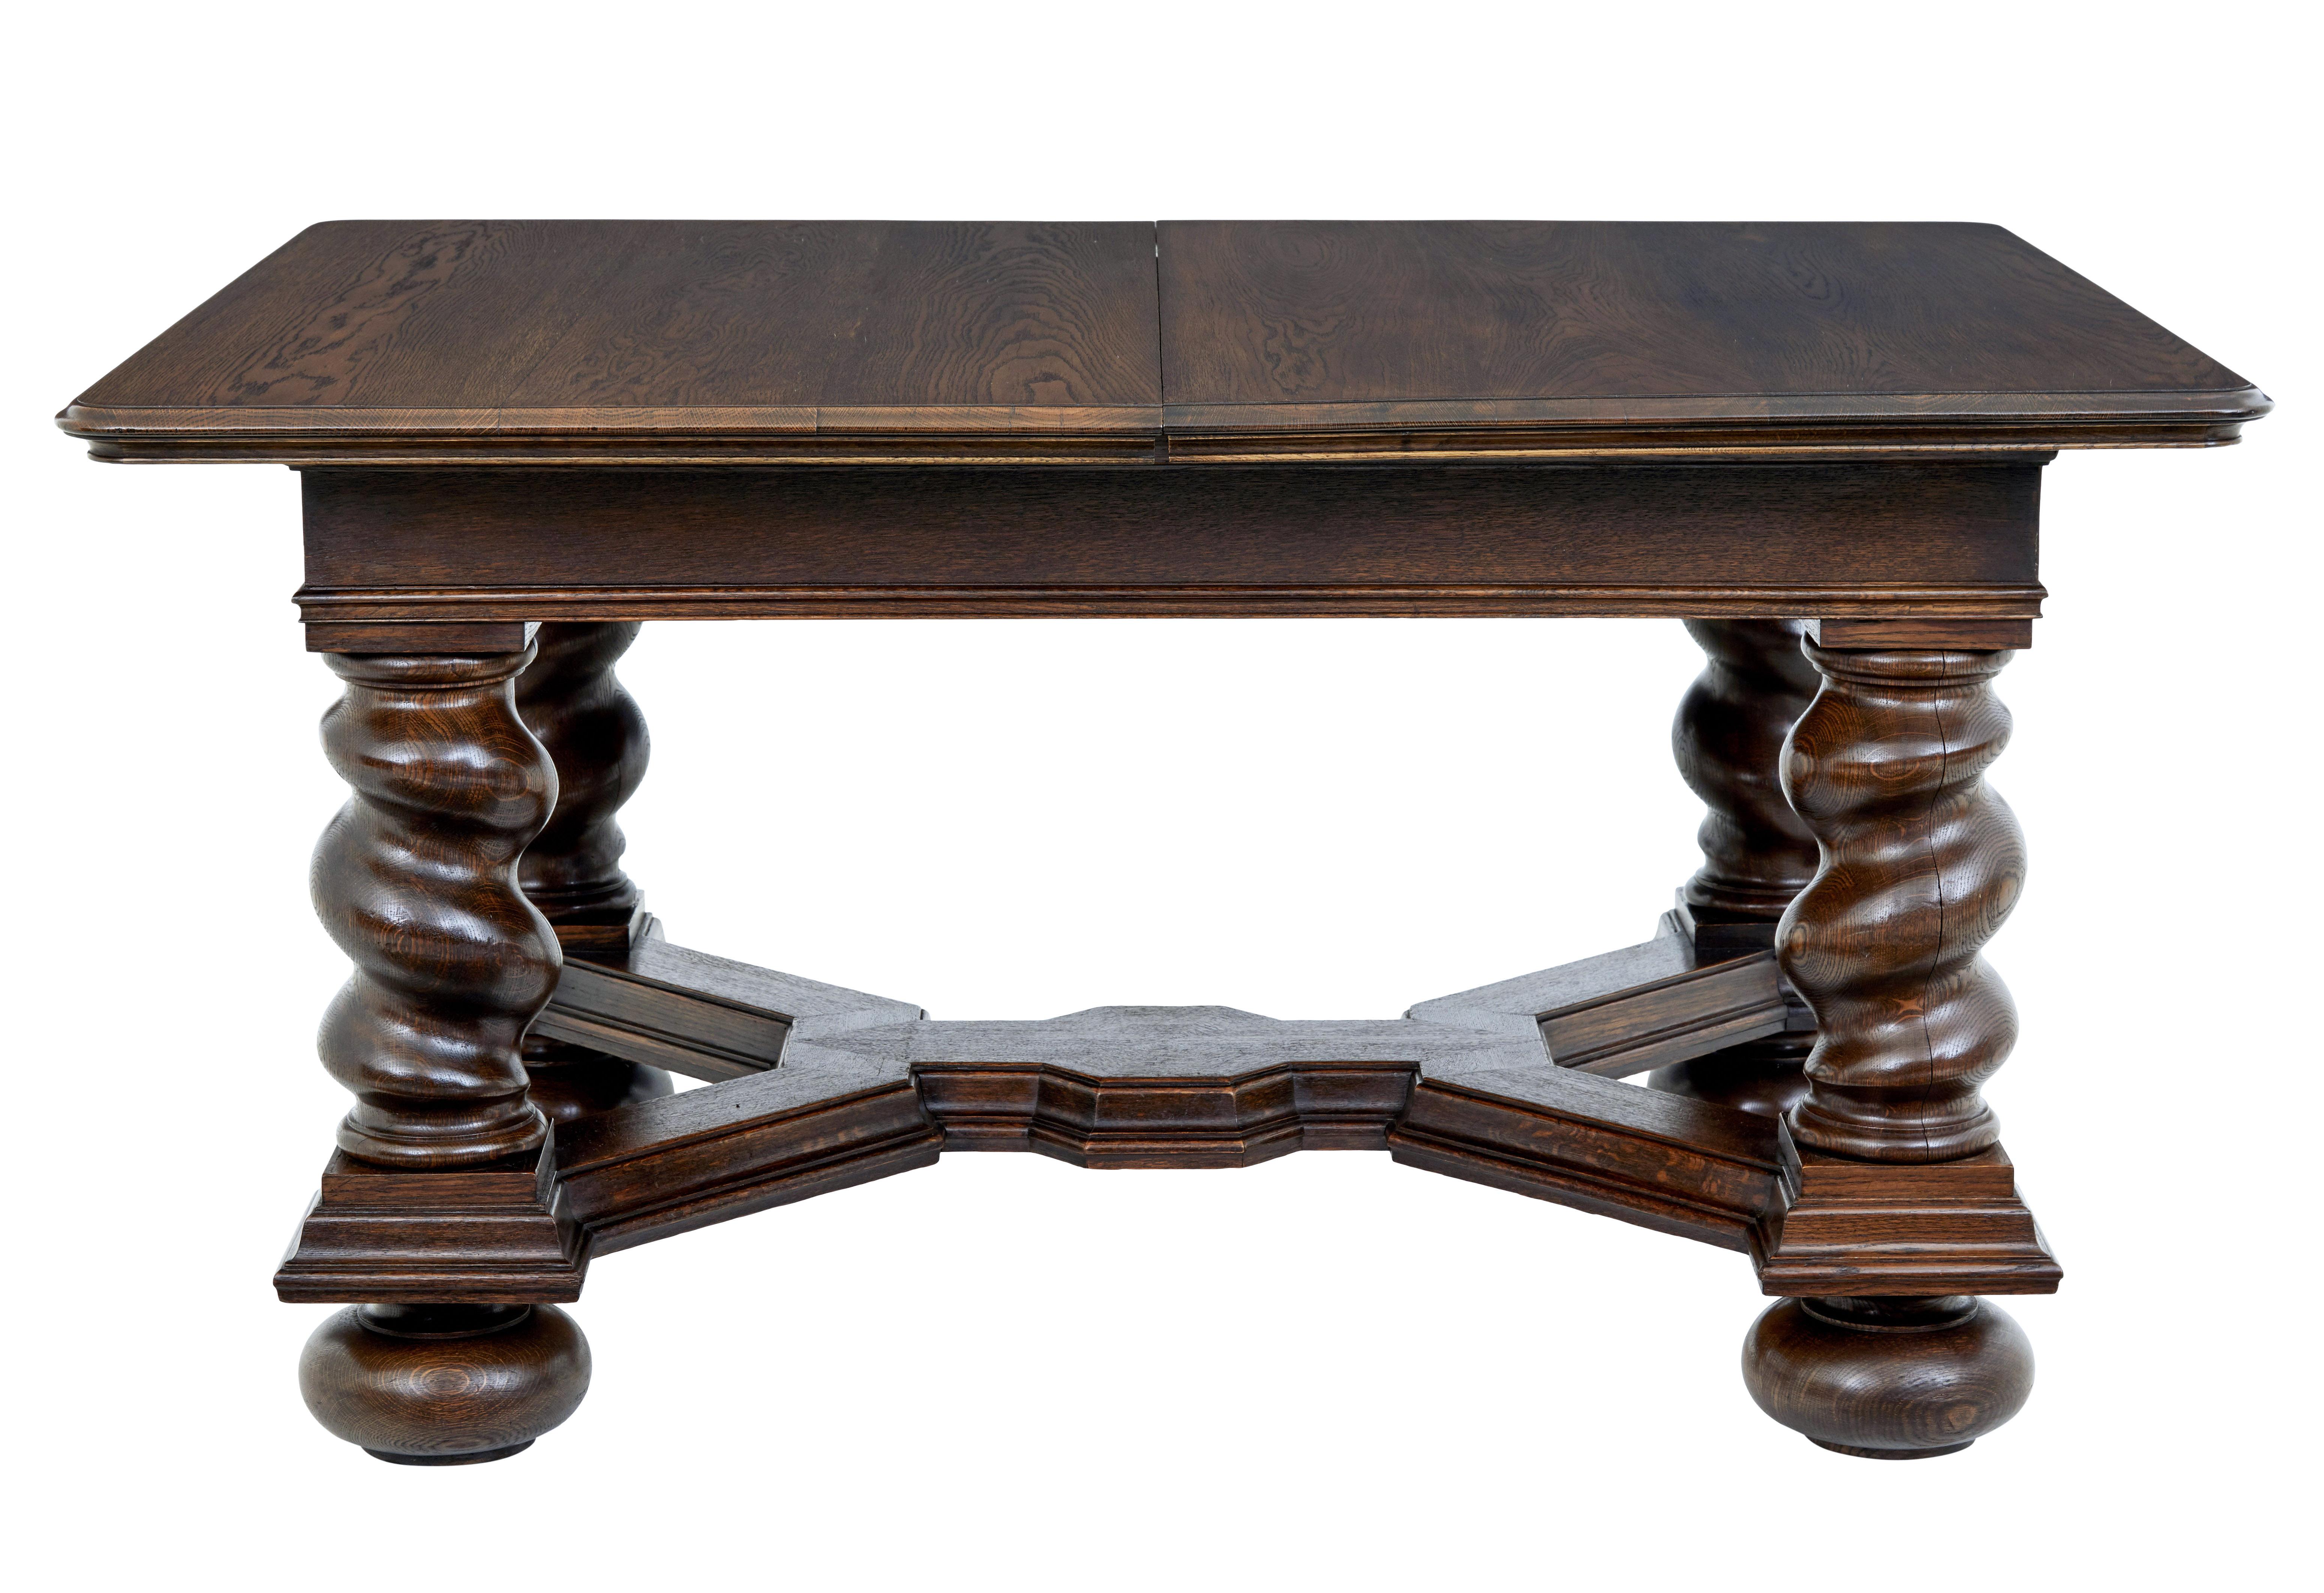 Early 20th century oak extending dining table, circa 1900.

Baroque revival table, with oak veneered top standing on a substantial base of barley twist legs united by a stretcher decorated in molding.

Supplied with 3 later leaves which have